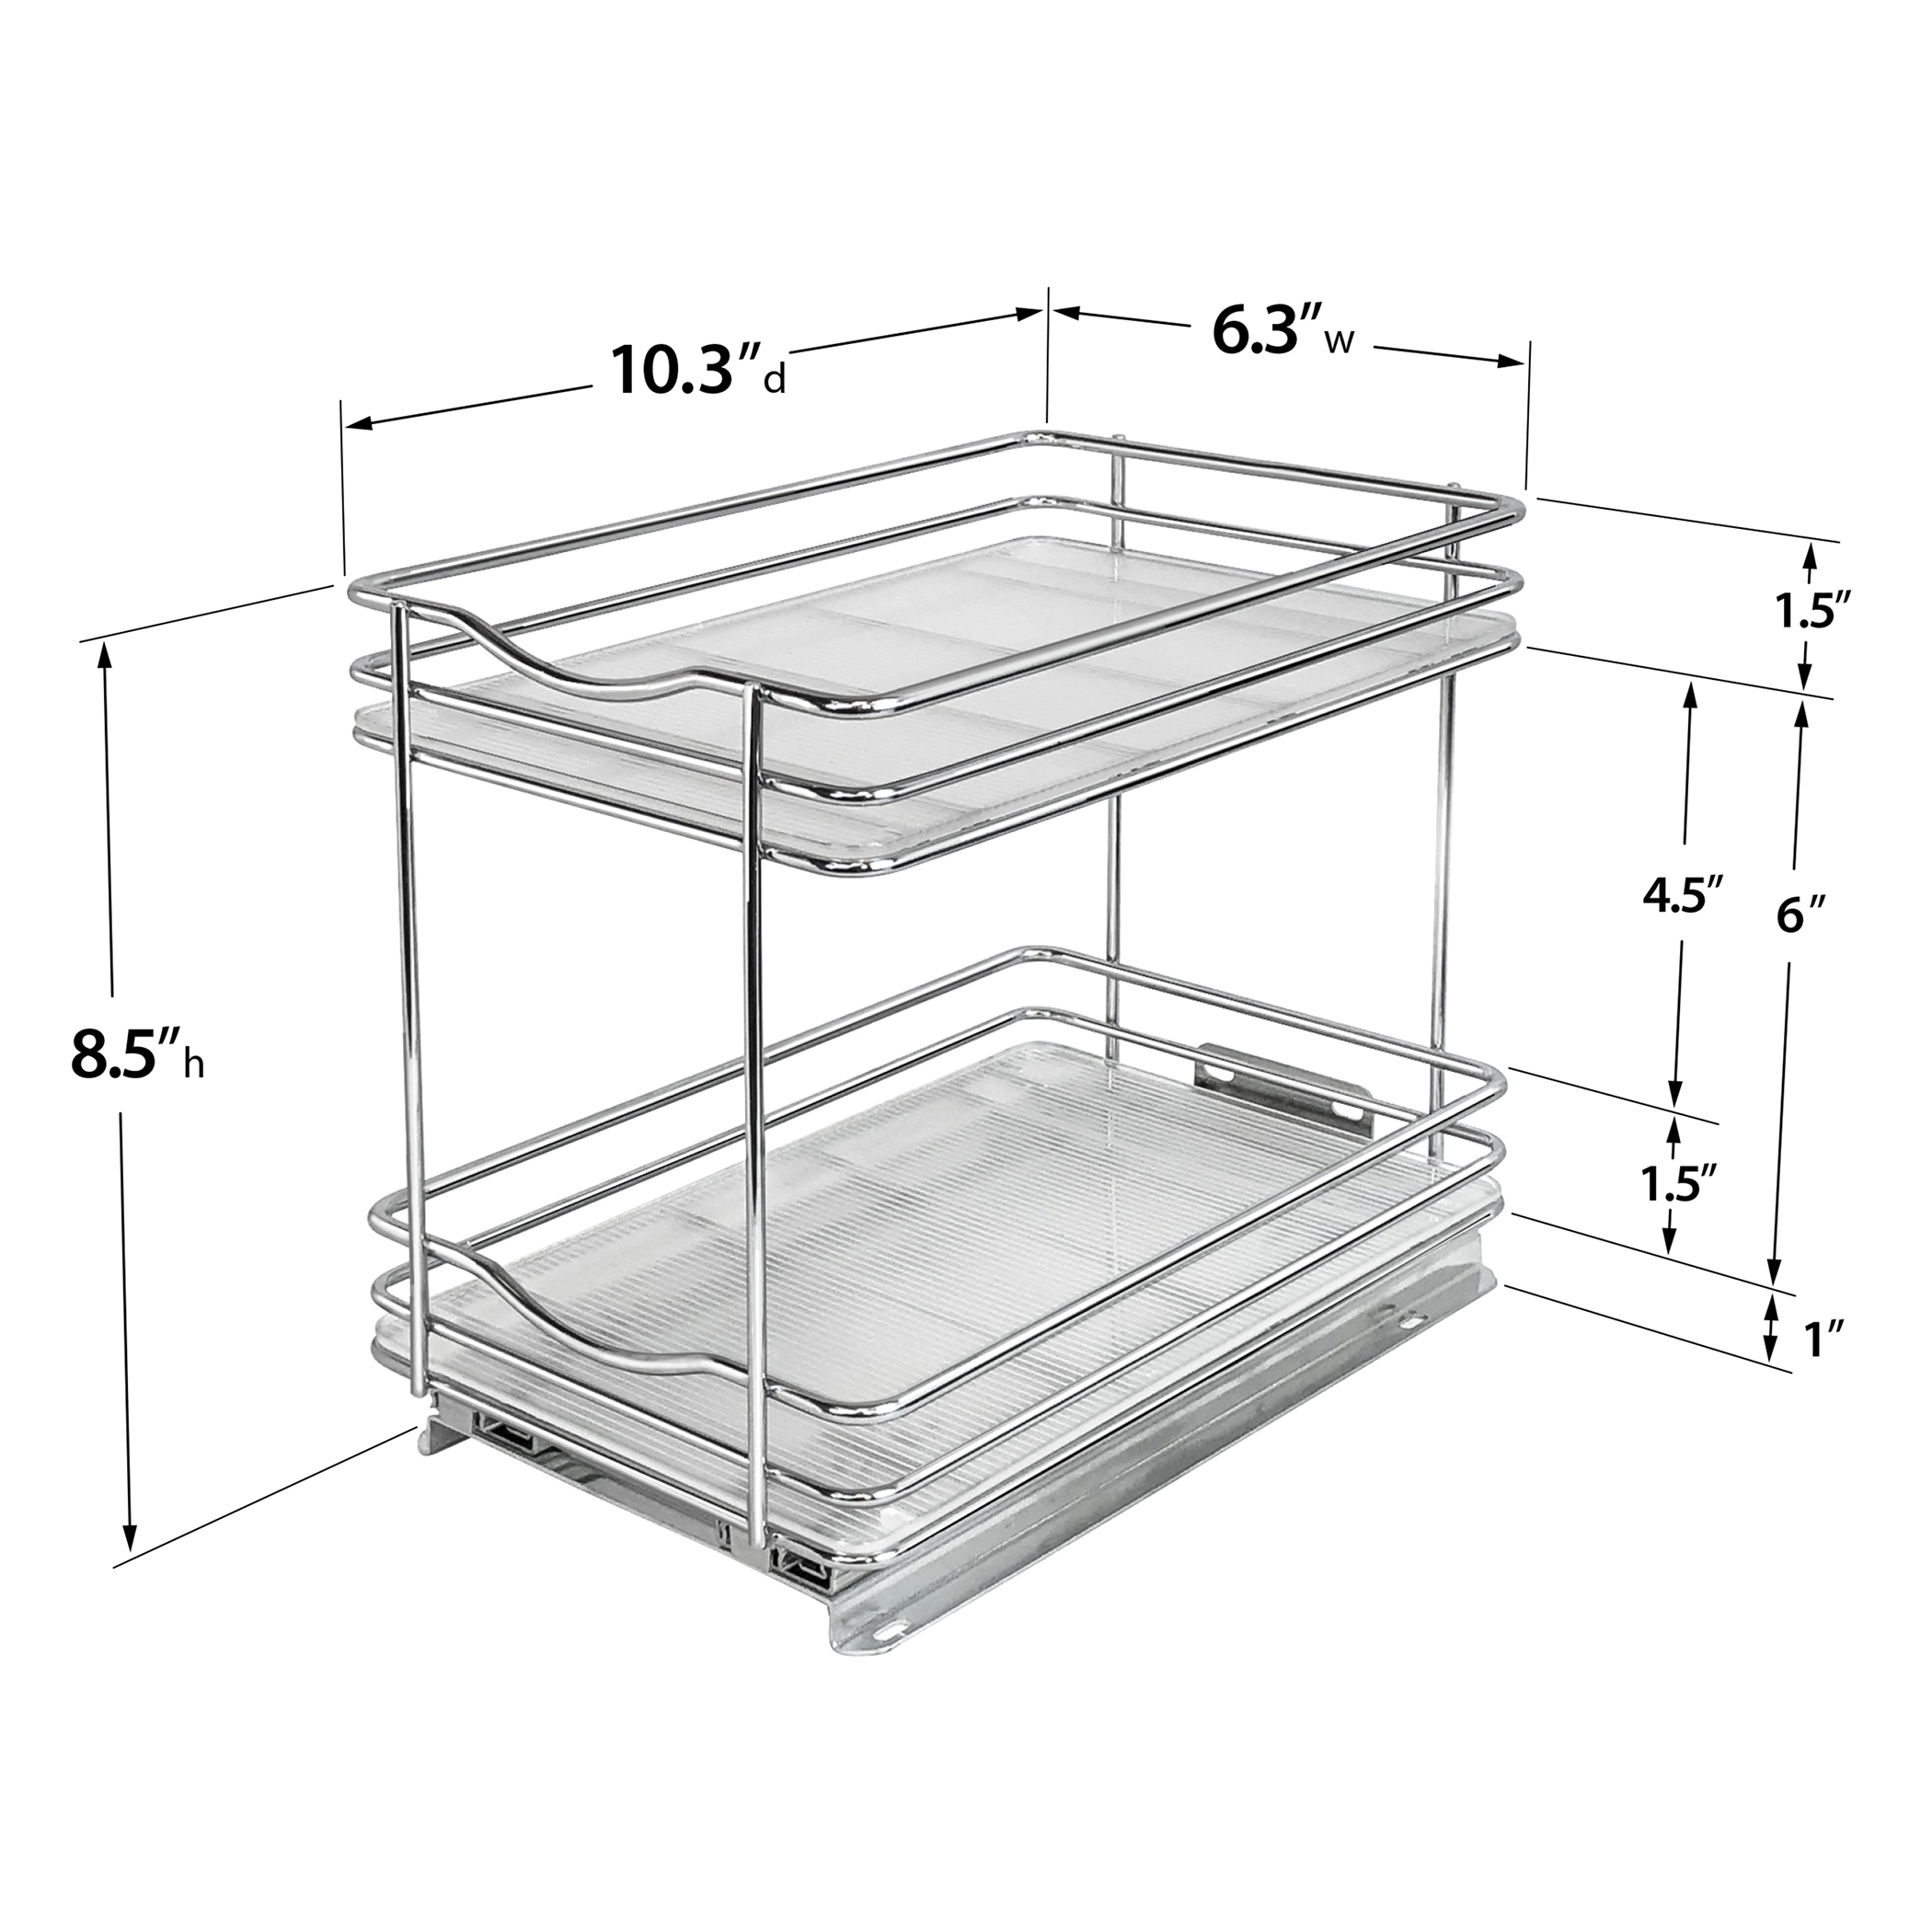 Spice Organizer Two Tier, Lynk Professional Slide Out Double Spice Rack Upper Cabinet Organizer 6 Wide